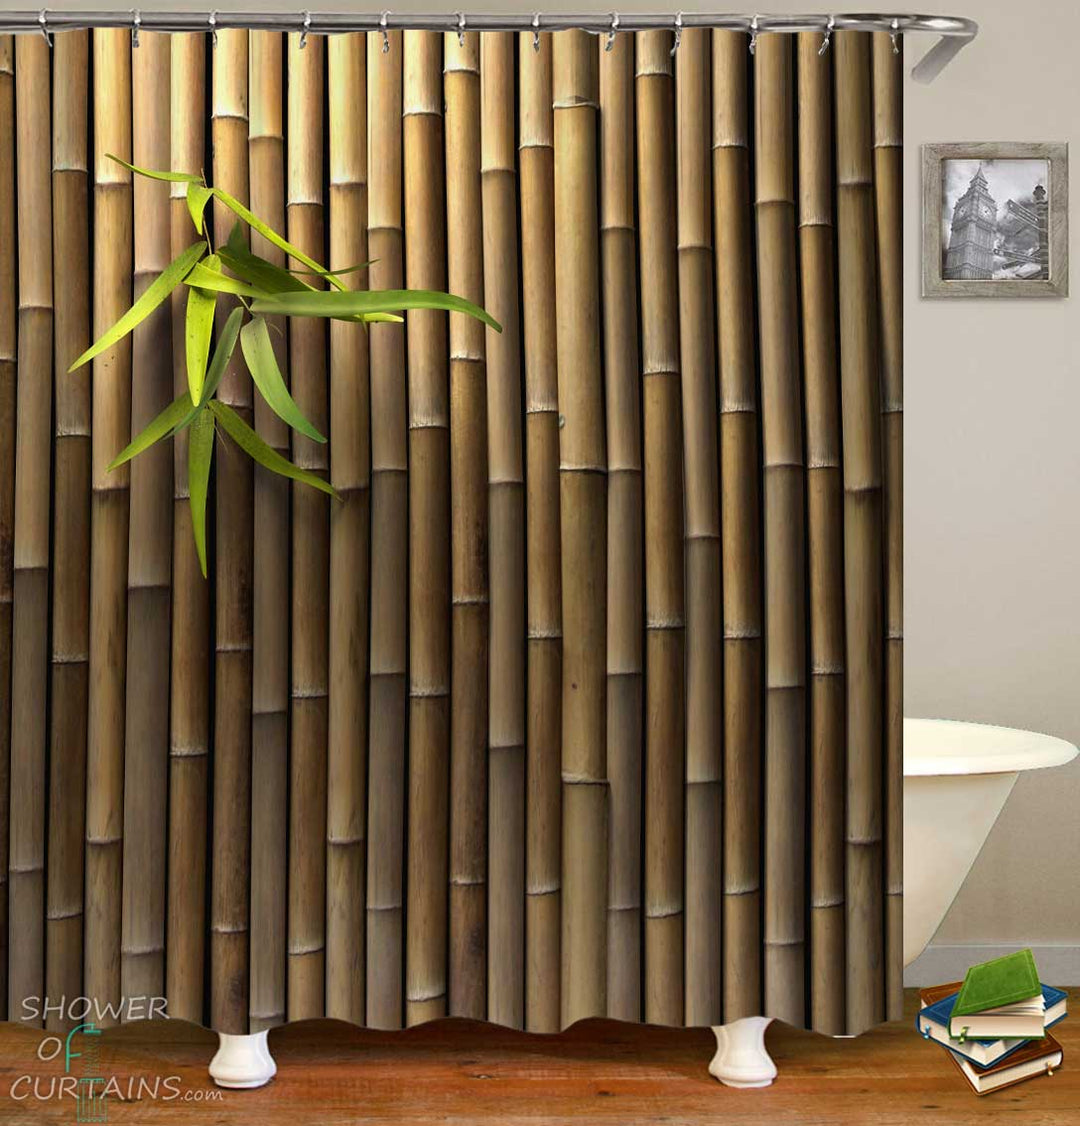 Shower Curtains with Bamboo Wall